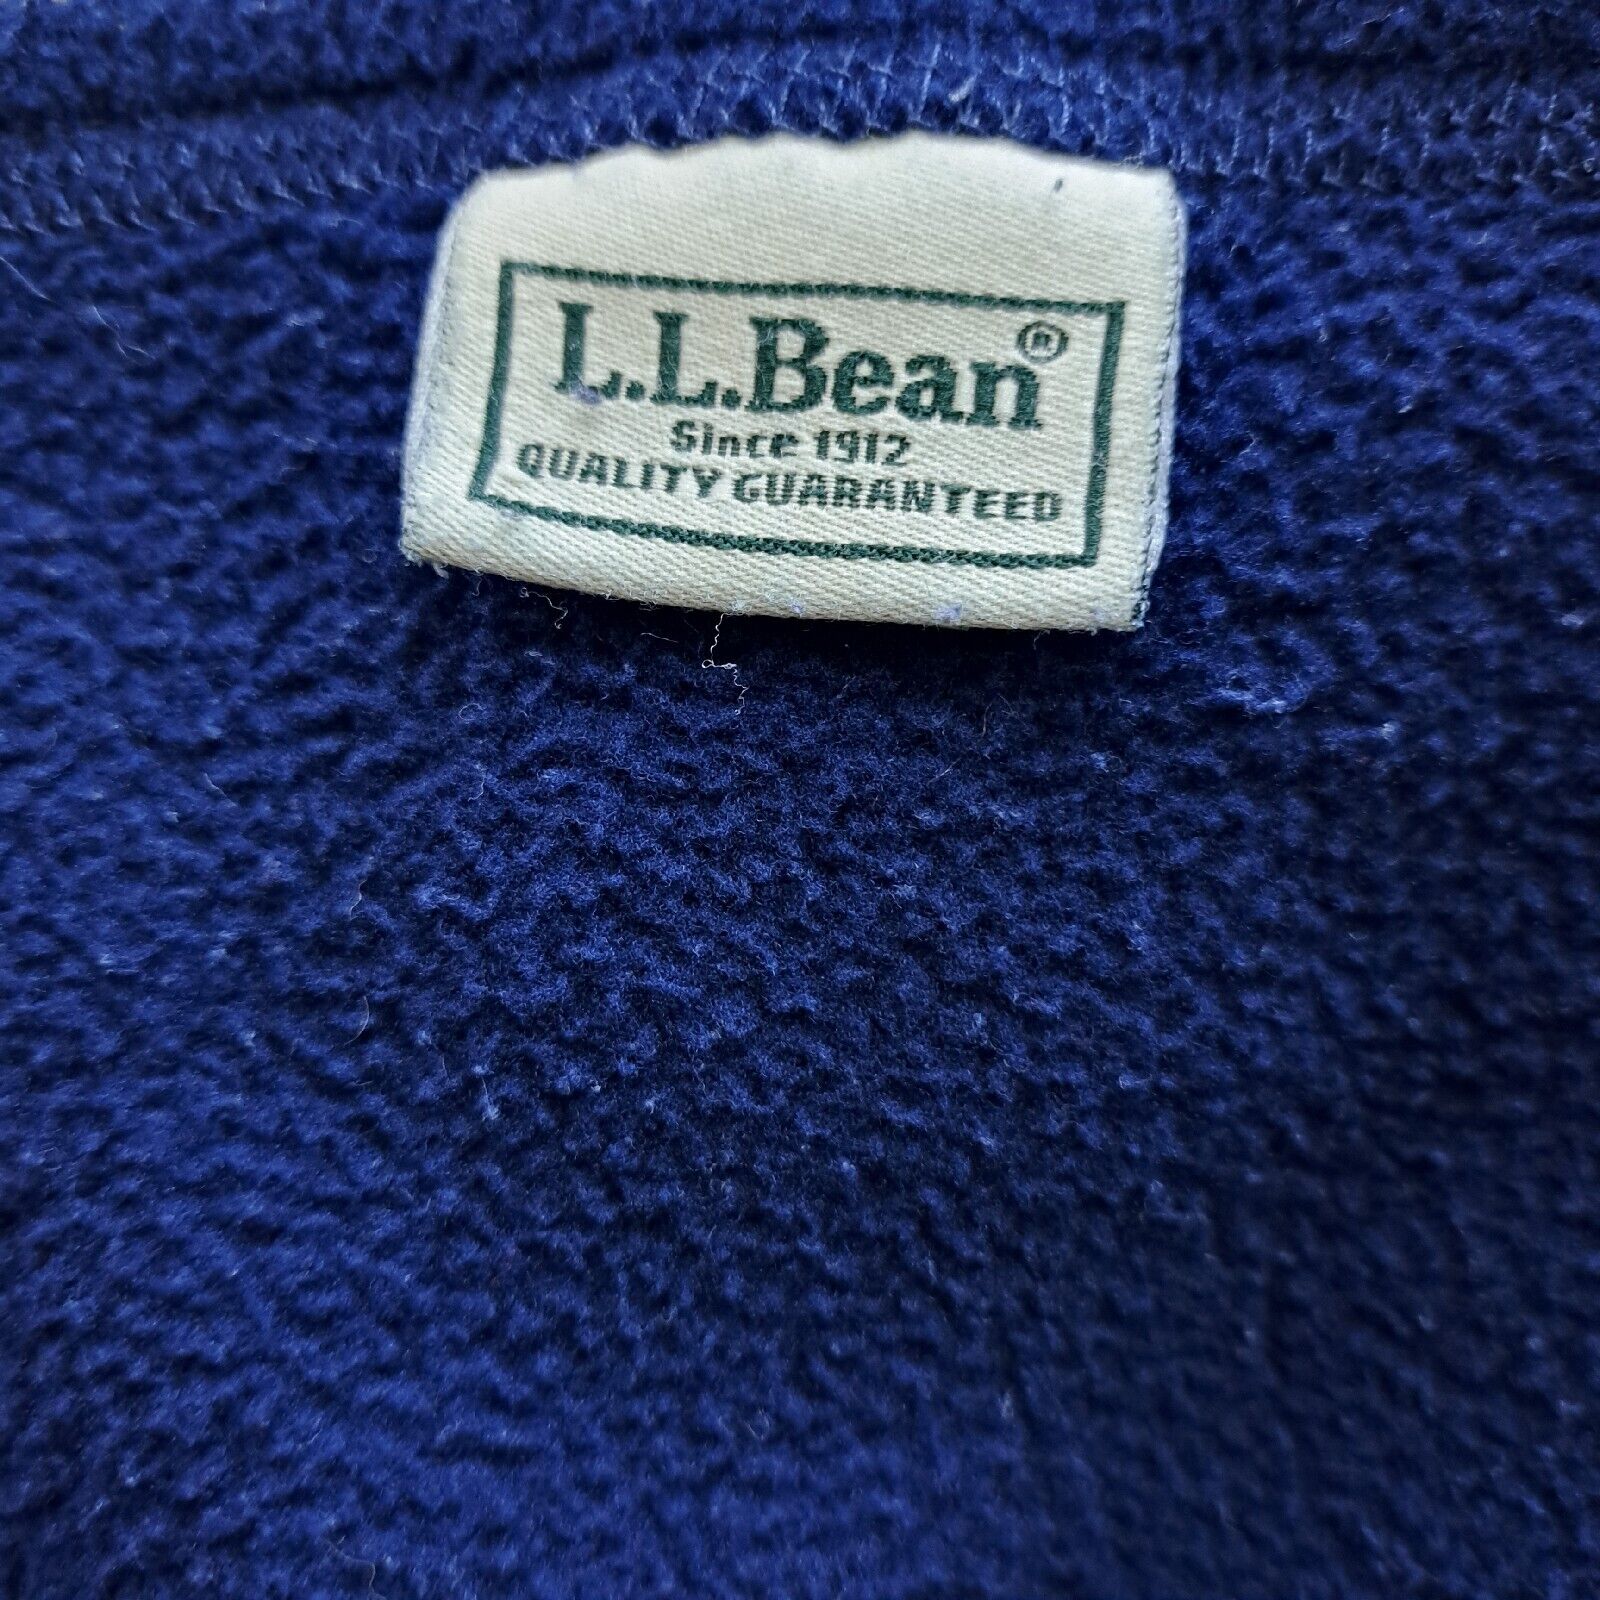 Vintage LL Bean Throw Blanket Polyester Twin Size 90 X 60 Navy Blue Made In USA